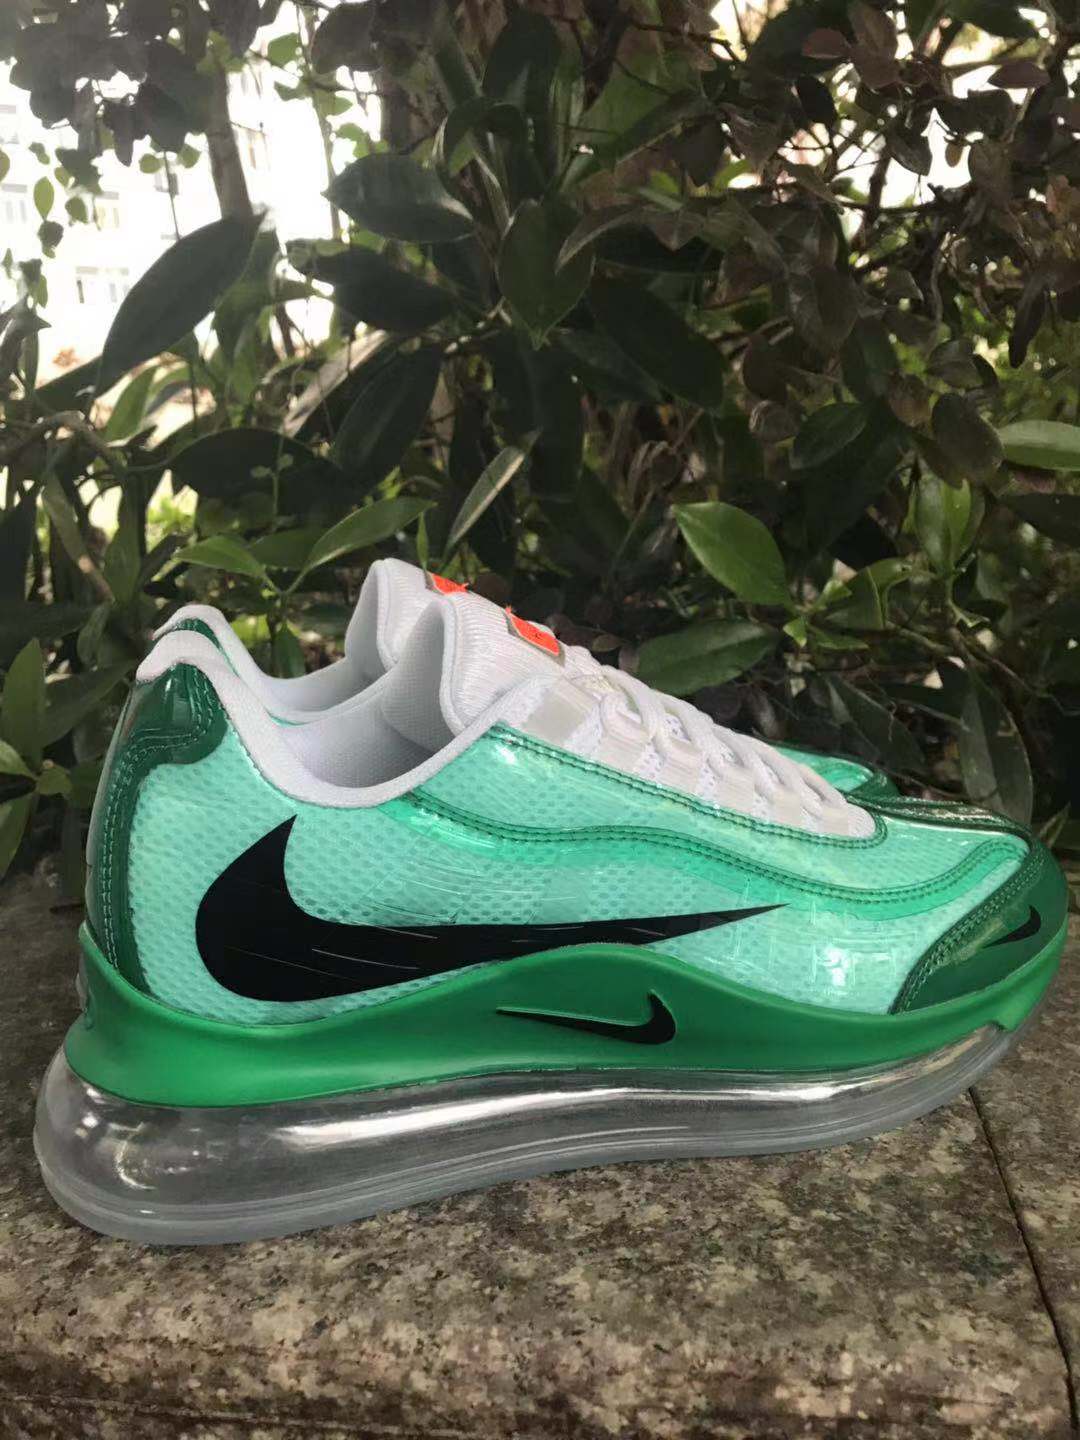 New Women Nike Air Max 720 95 Green Black Shoes - Click Image to Close